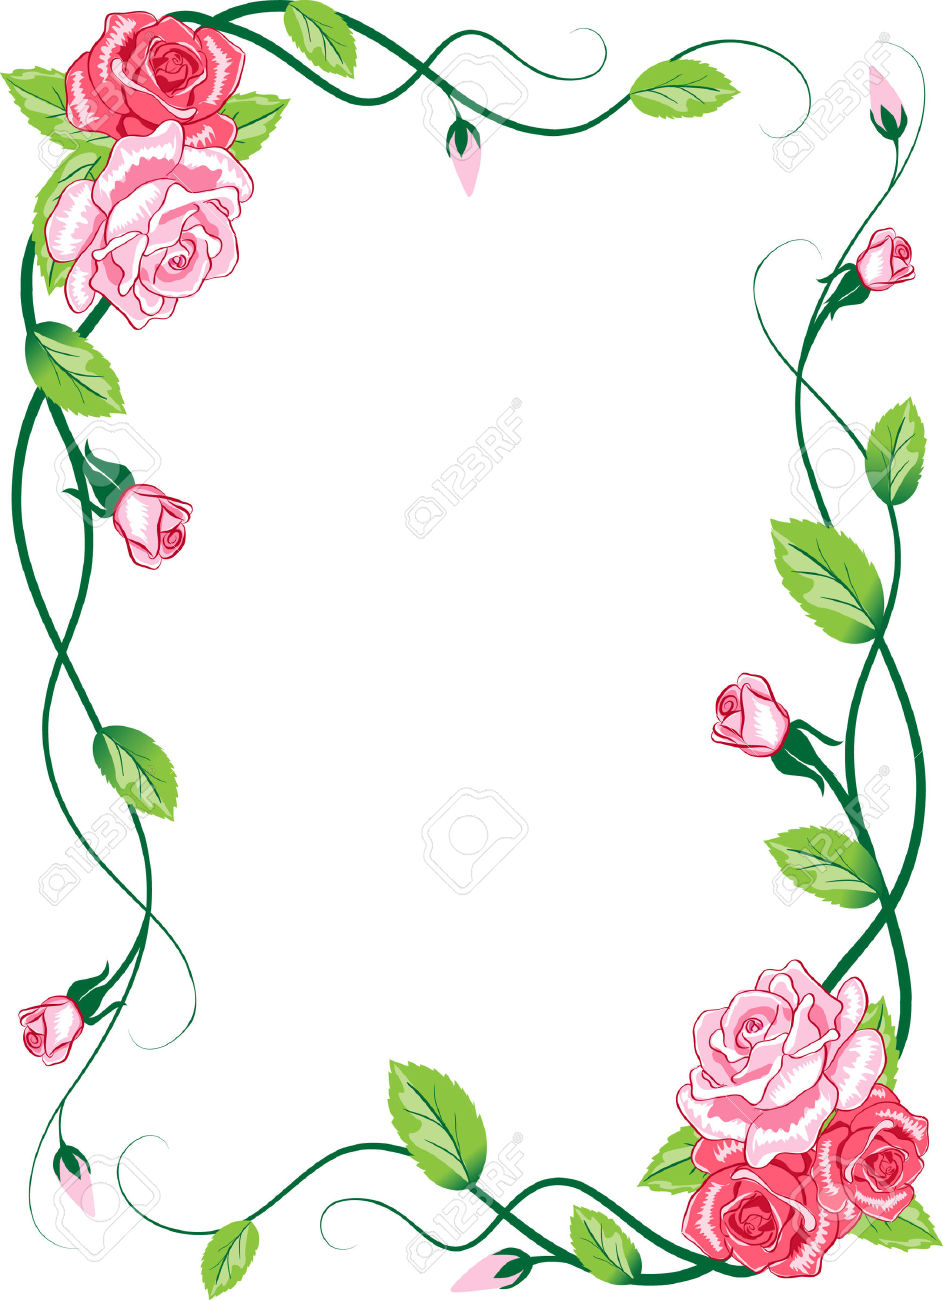 rose-flower-borders-clipground